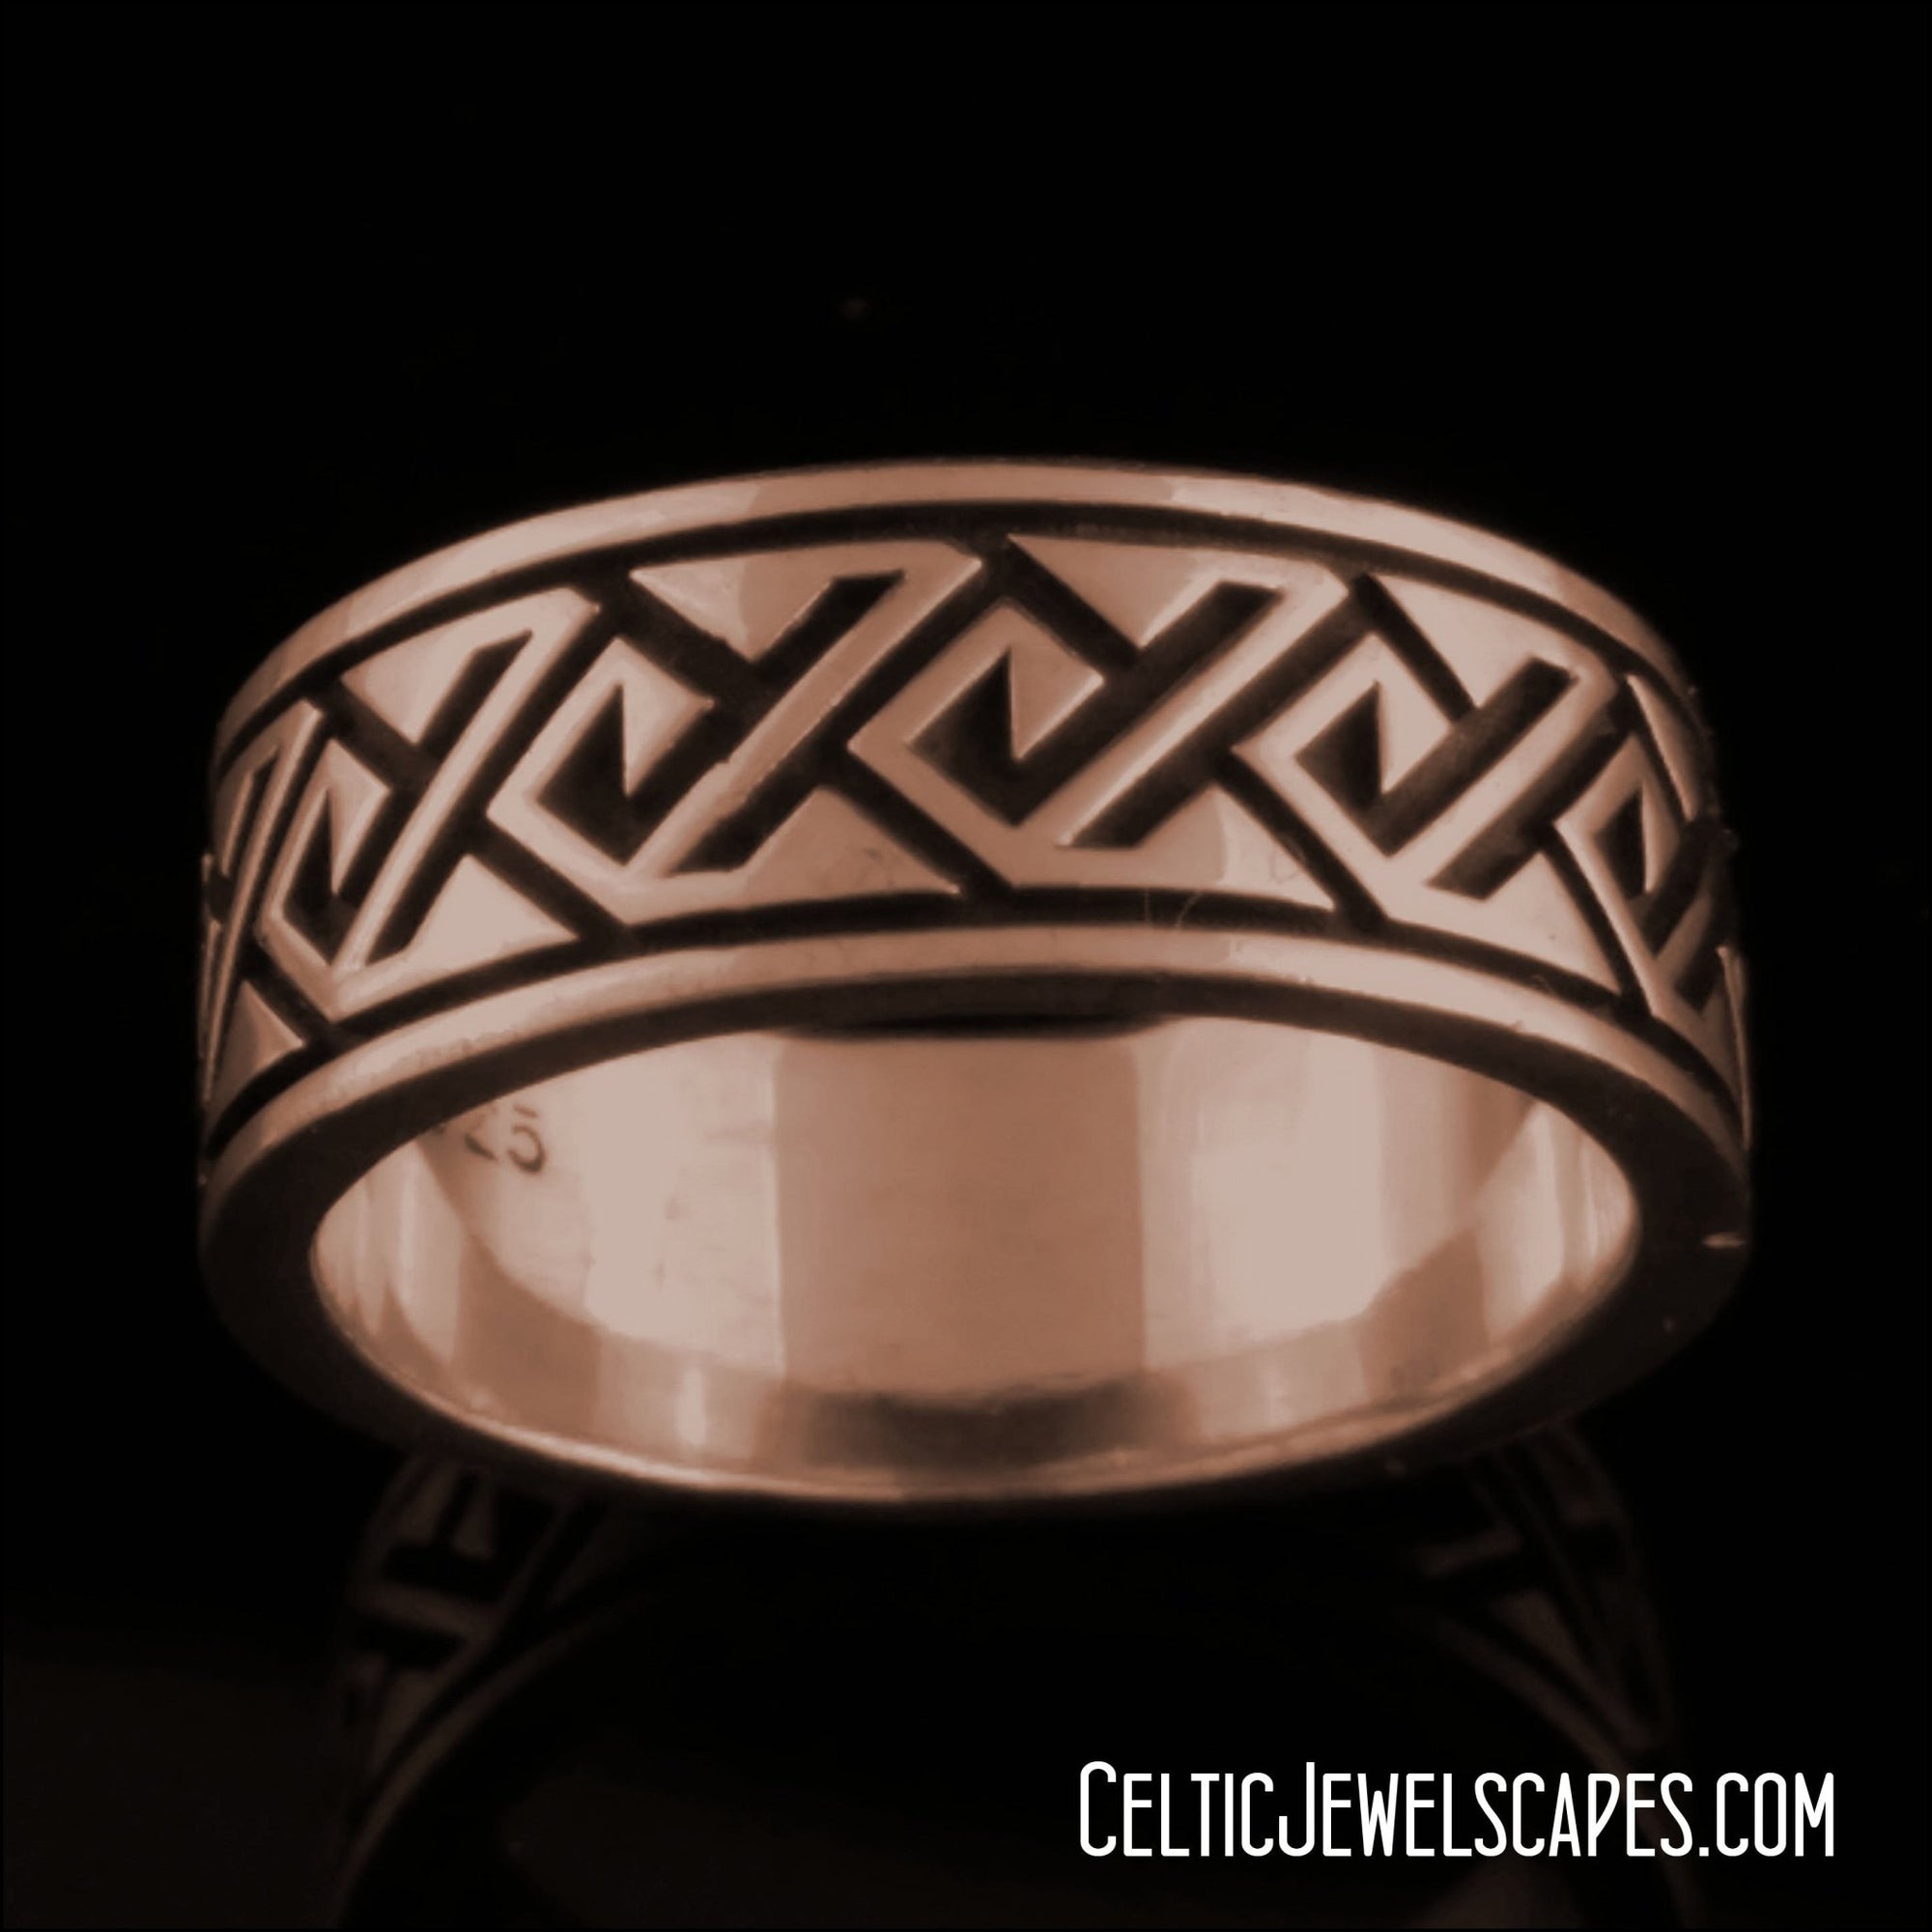 DURROW - Starting at $199 - Celtic Jewelscapes